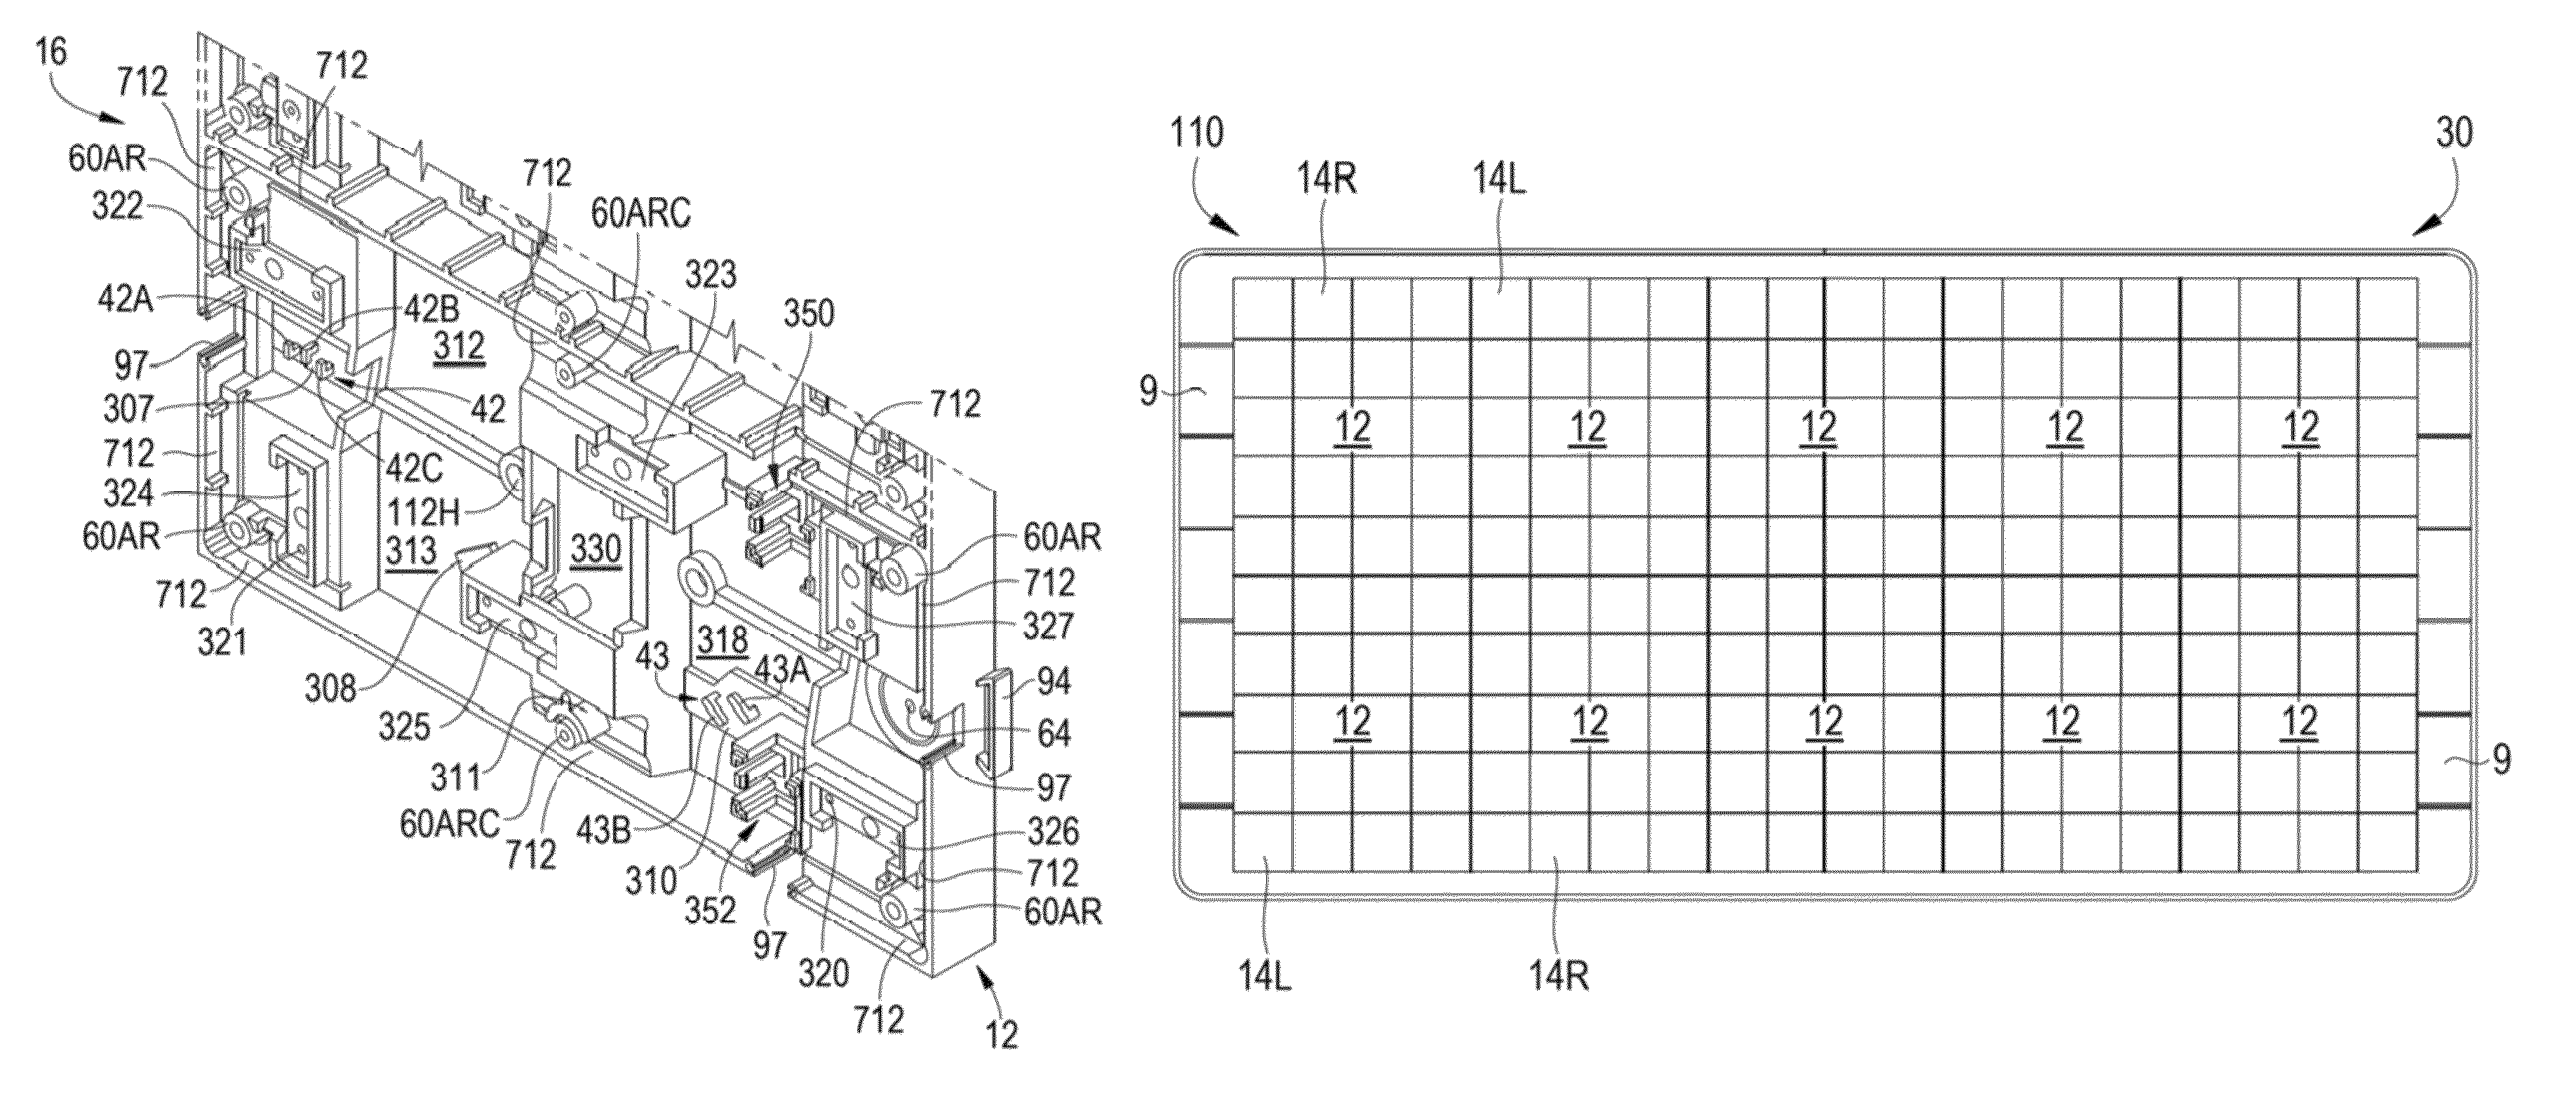 Compound structural frame and method of using same for efficient retrofitting